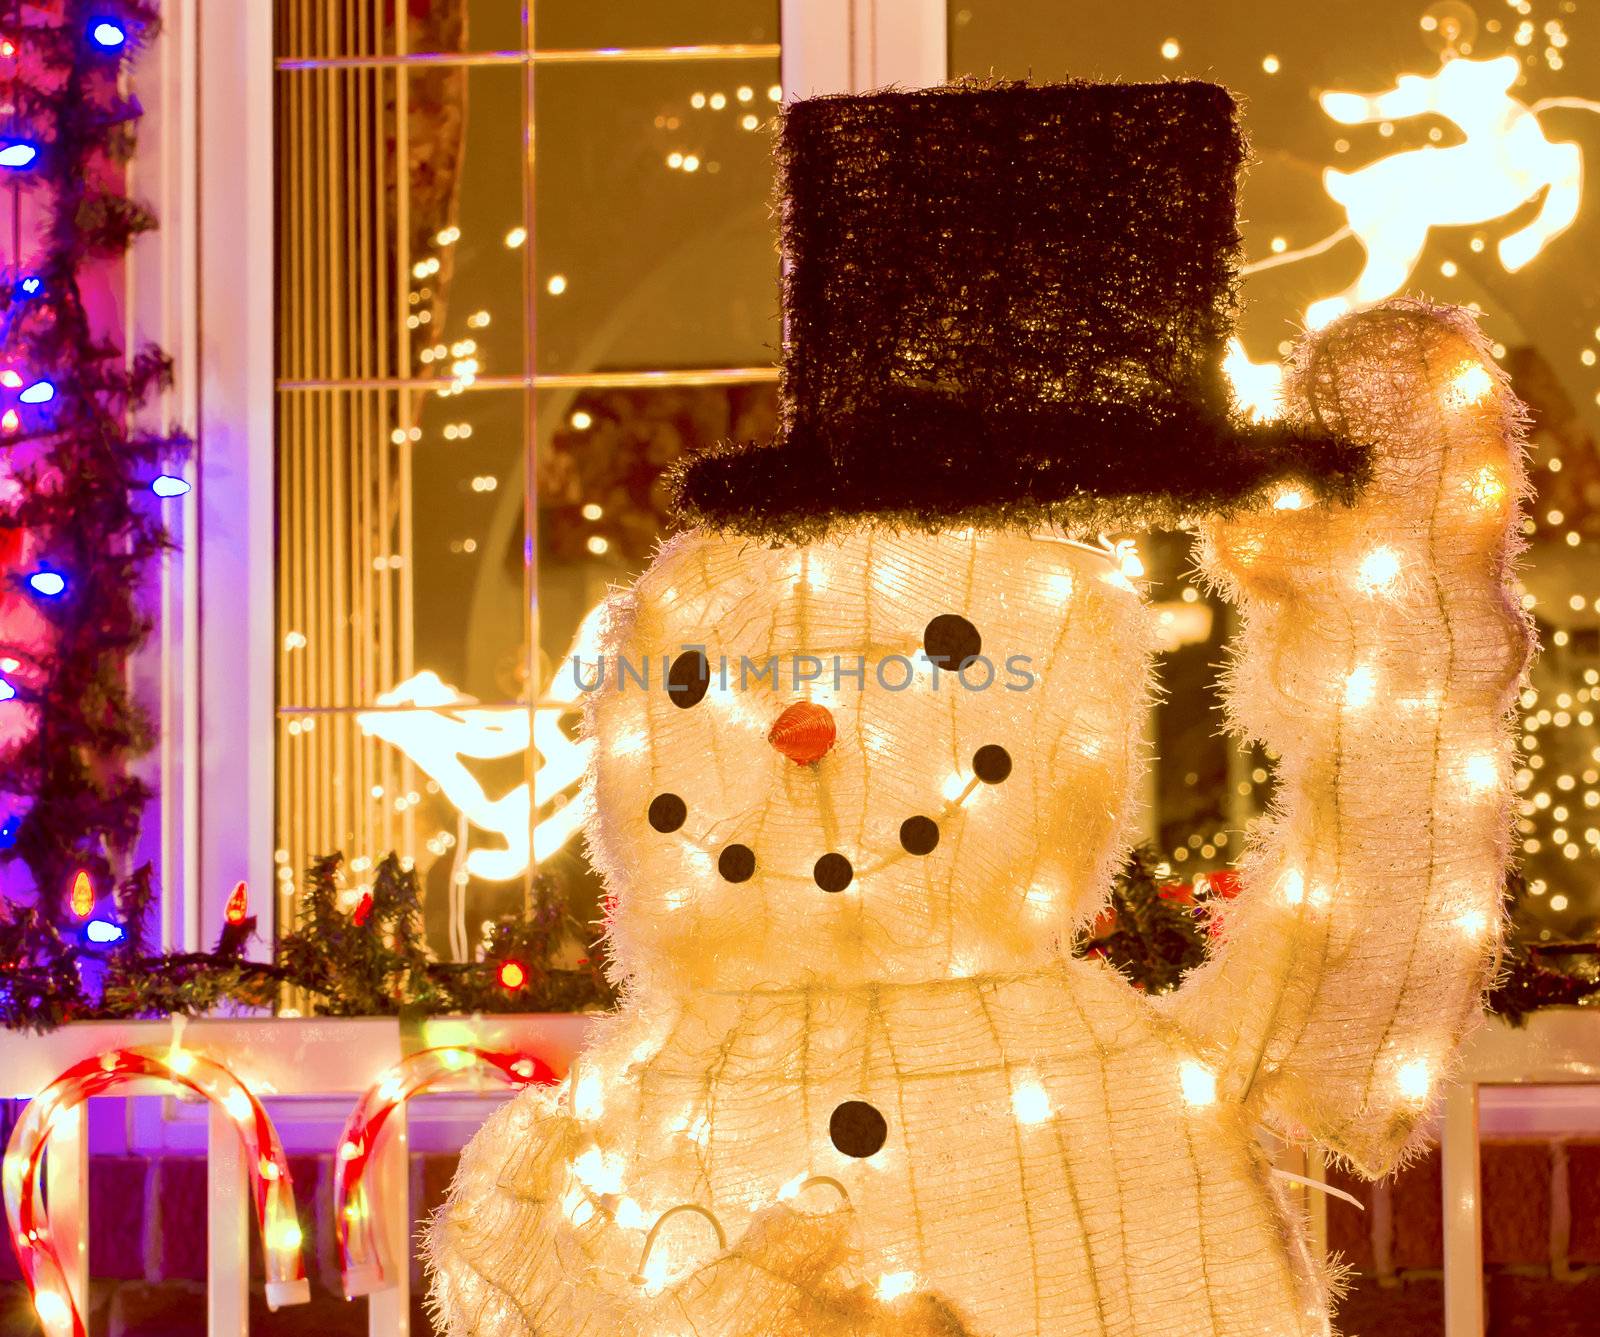 Snowman with top hat decorated for Christmas.